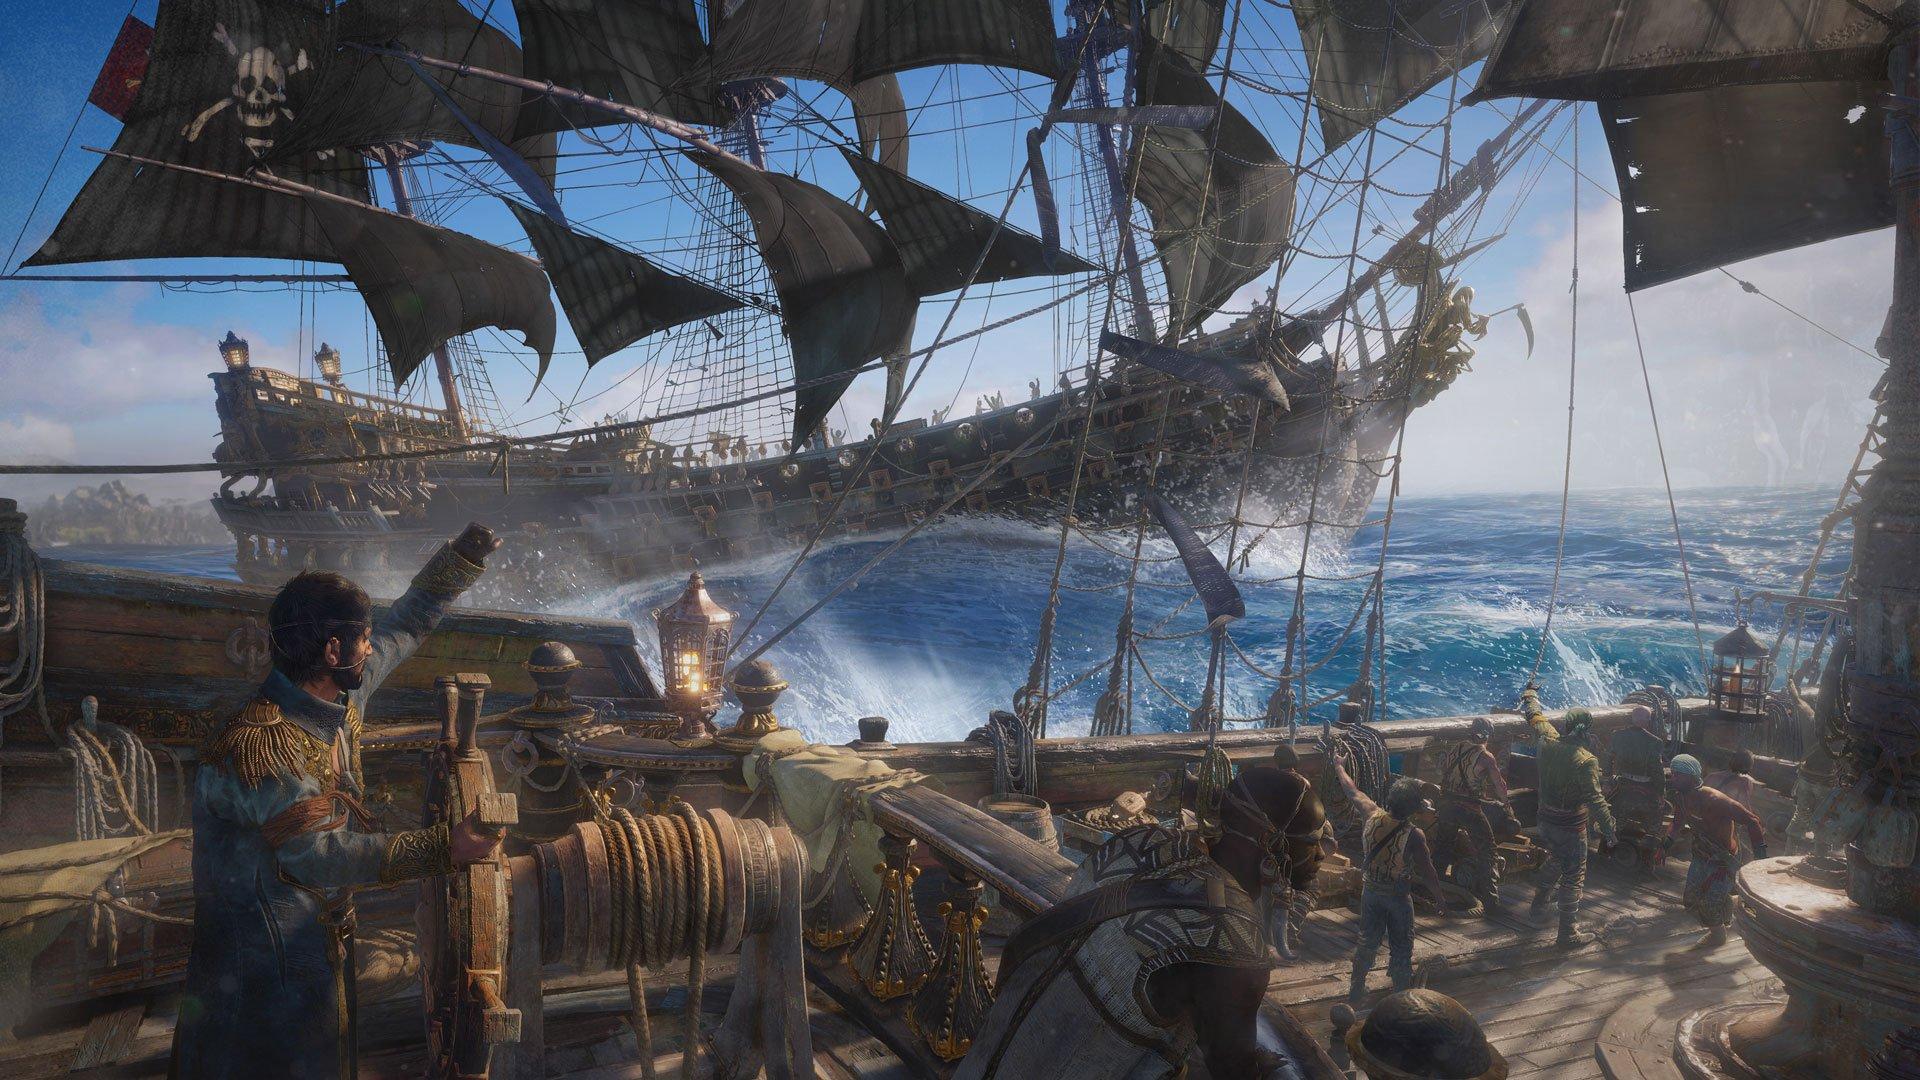 E3 2018: Skull & Bones Makes This Look Like the Pirate Game